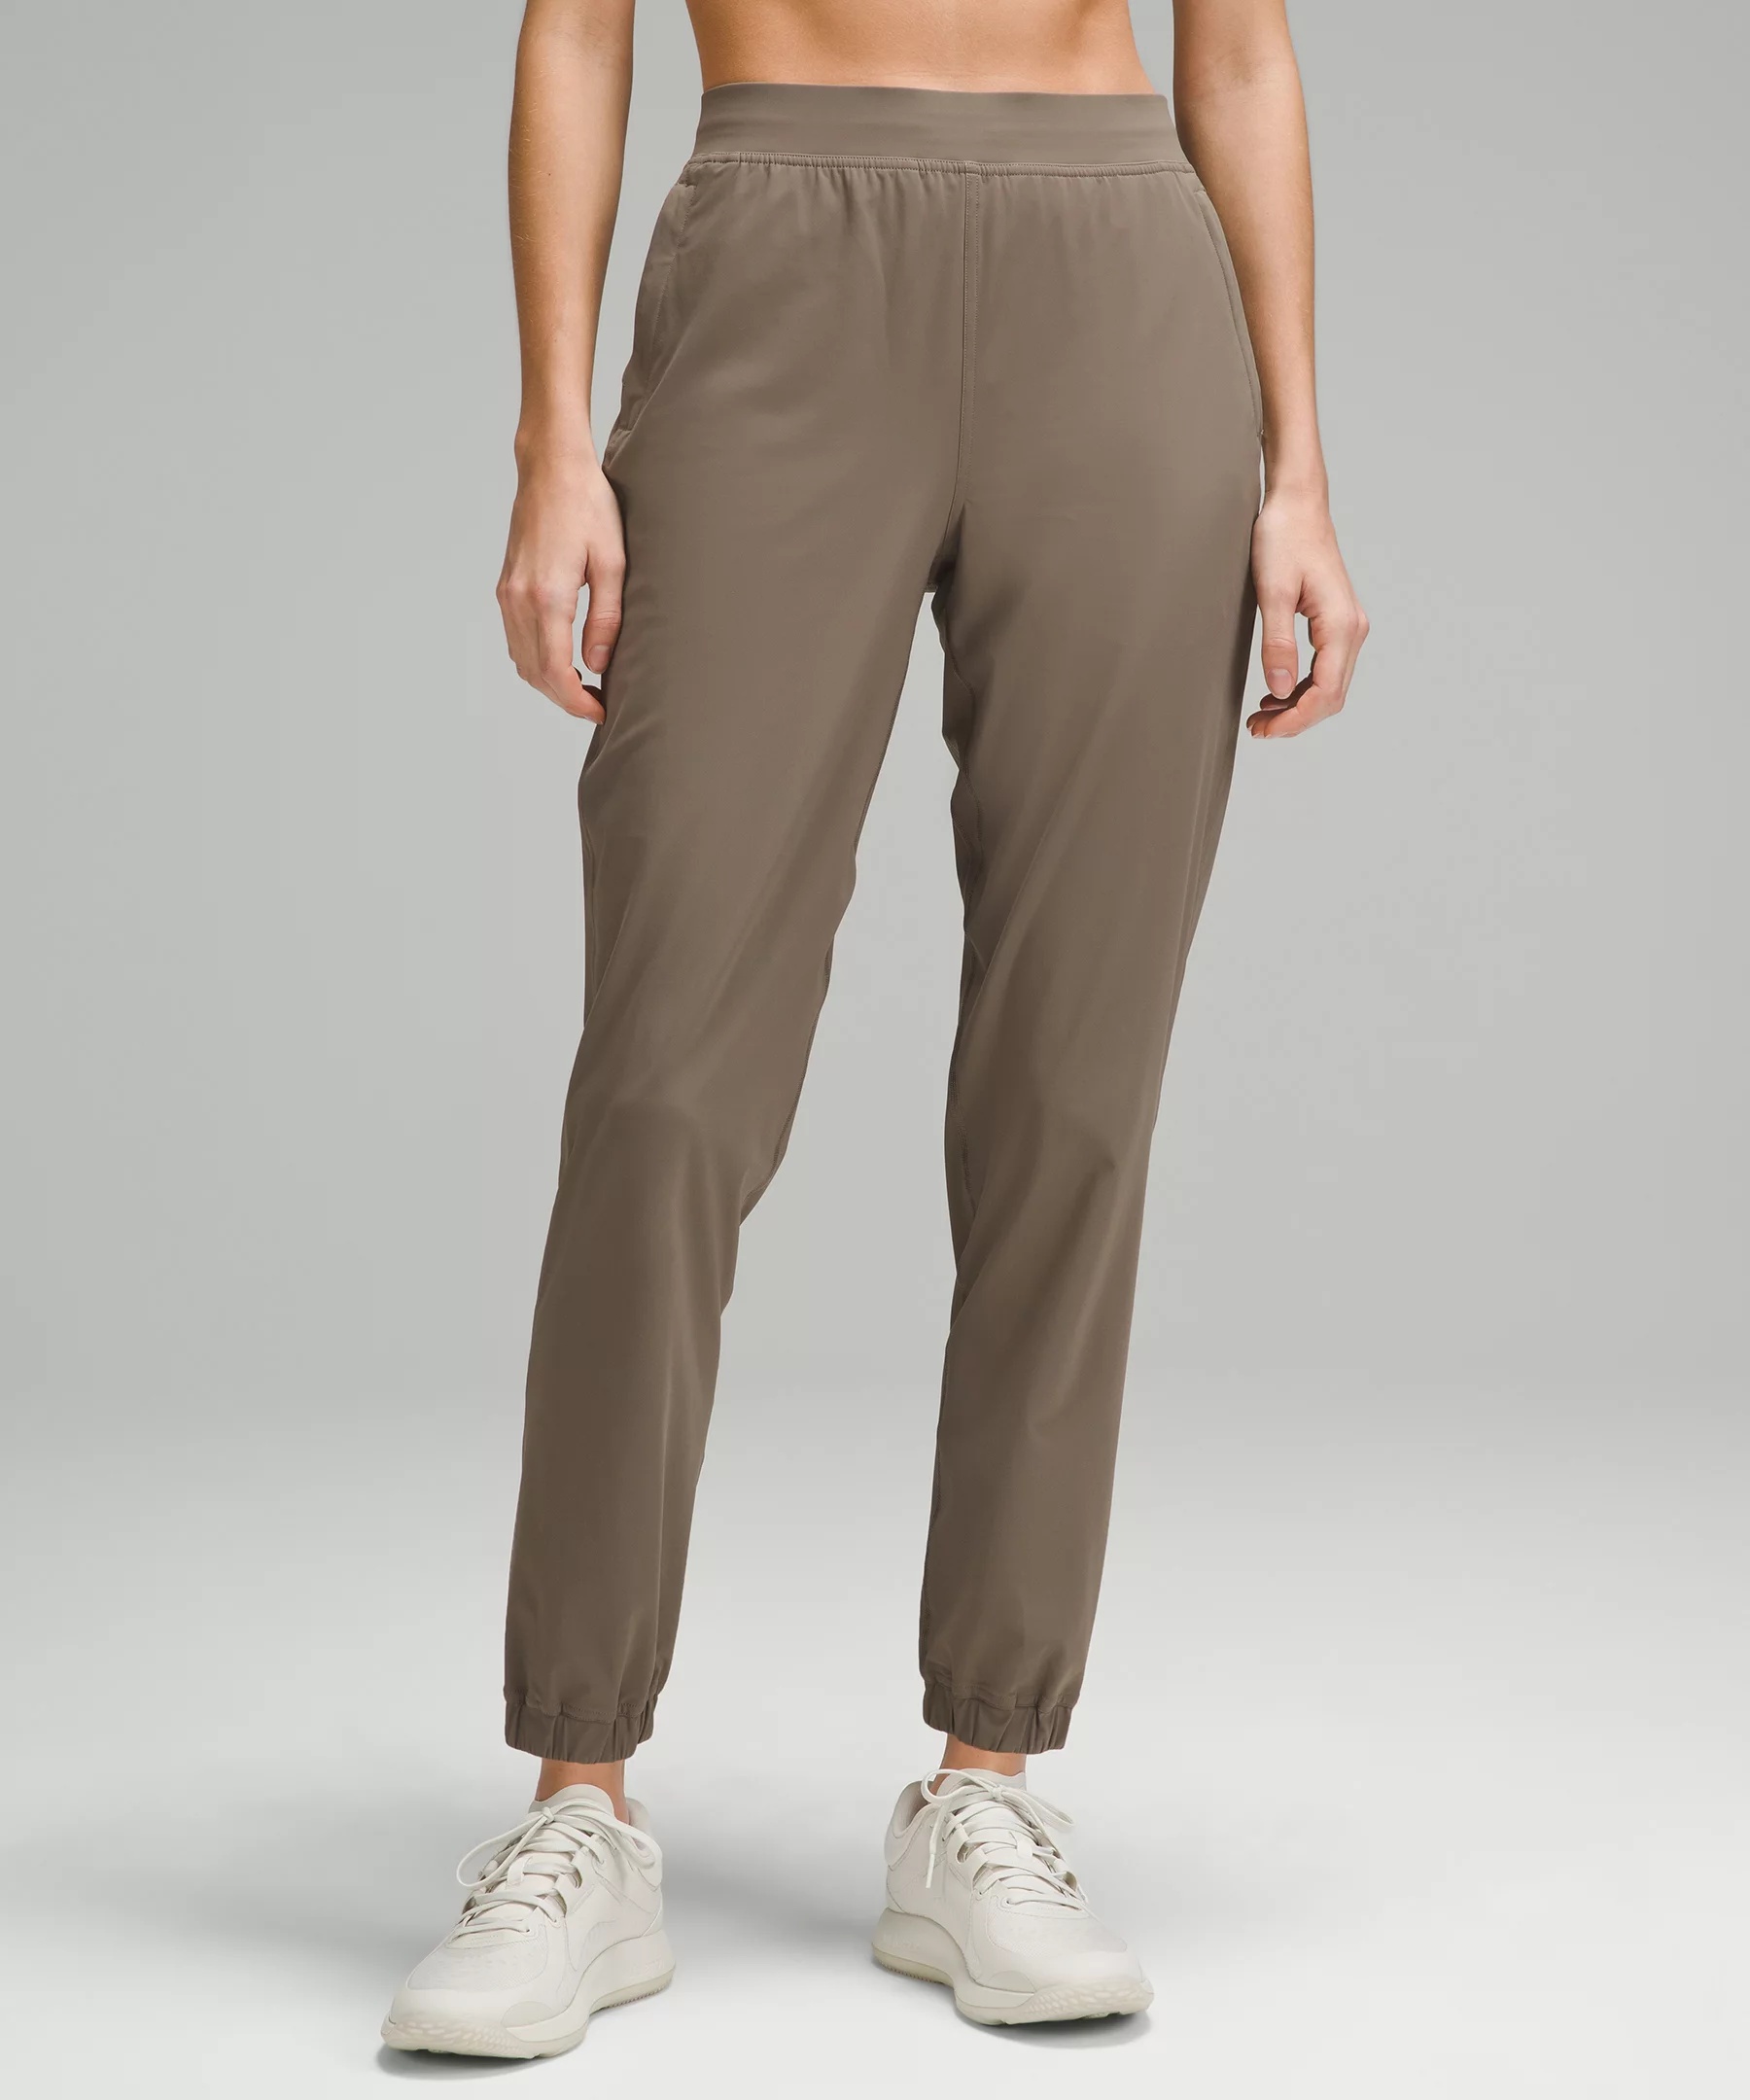 Adapted State High-Rise Jogger *Full Length - 1